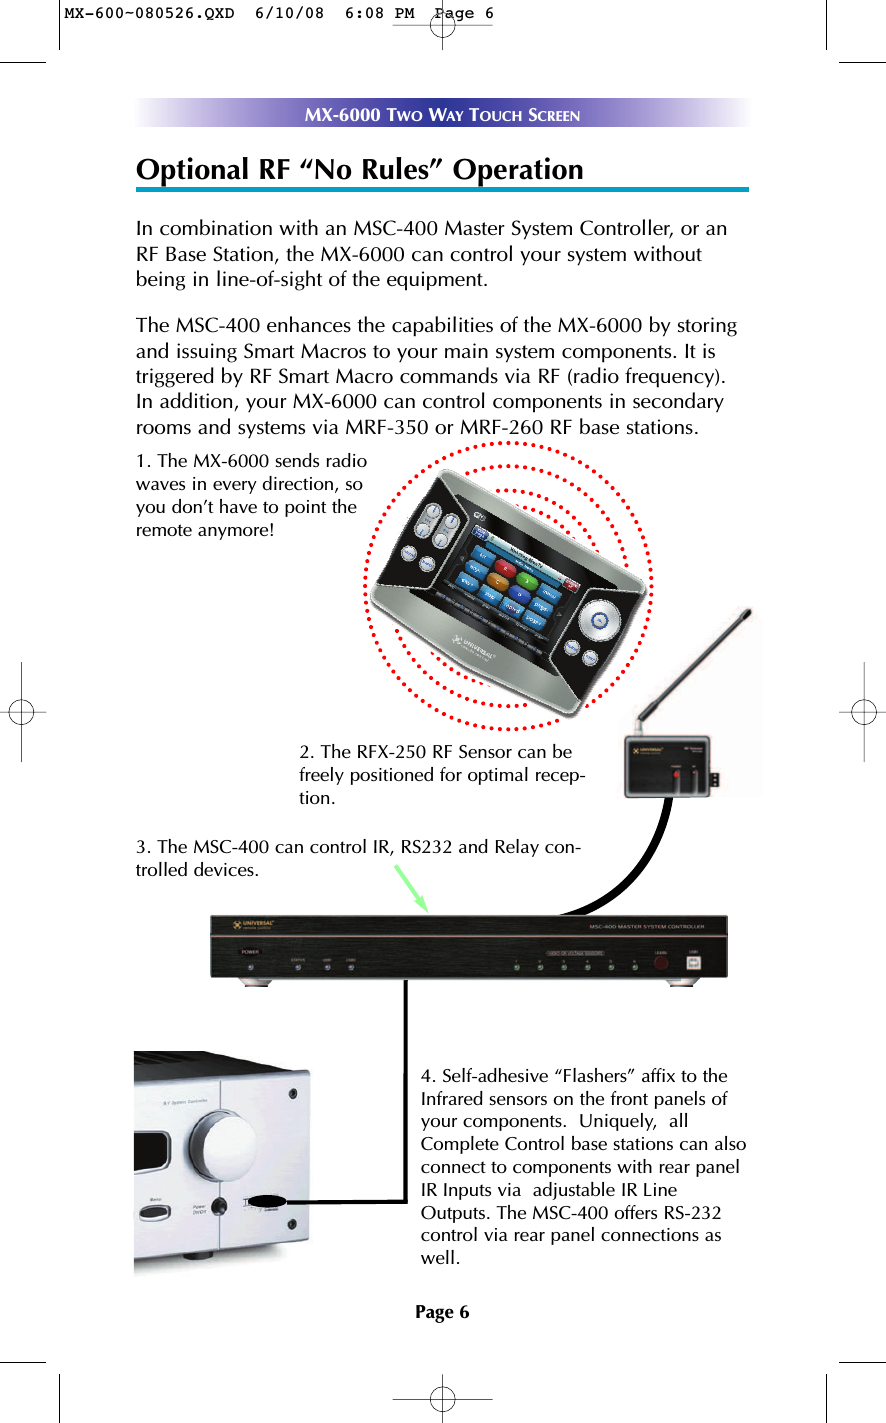 Page 6MX-6000 TWO WAY TOUCH SCREENOptional RF “No Rules” OperationIn combination with an MSC-400 Master System Controller, or anRF Base Station, the MX-6000 can control your system withoutbeing in line-of-sight of the equipment. The MSC-400 enhances the capabilities of the MX-6000 by storingand issuing Smart Macros to your main system components. It istriggered by RF Smart Macro commands via RF (radio frequency).In addition, your MX-6000 can control components in secondaryrooms and systems via MRF-350 or MRF-260 RF base stations.4. Self-adhesive “Flashers” affix to theInfrared sensors on the front panels ofyour components.  Uniquely,  allComplete Control base stations can alsoconnect to components with rear panelIR Inputs via  adjustable IR LineOutputs. The MSC-400 offers RS-232control via rear panel connections aswell.3. The MSC-400 can control IR, RS232 and Relay con-trolled devices. 1. The MX-6000 sends radiowaves in every direction, soyou don’t have to point theremote anymore! 2. The RFX-250 RF Sensor can befreely positioned for optimal recep-tion.MX-600~080526.QXD  6/10/08  6:08 PM  Page 6